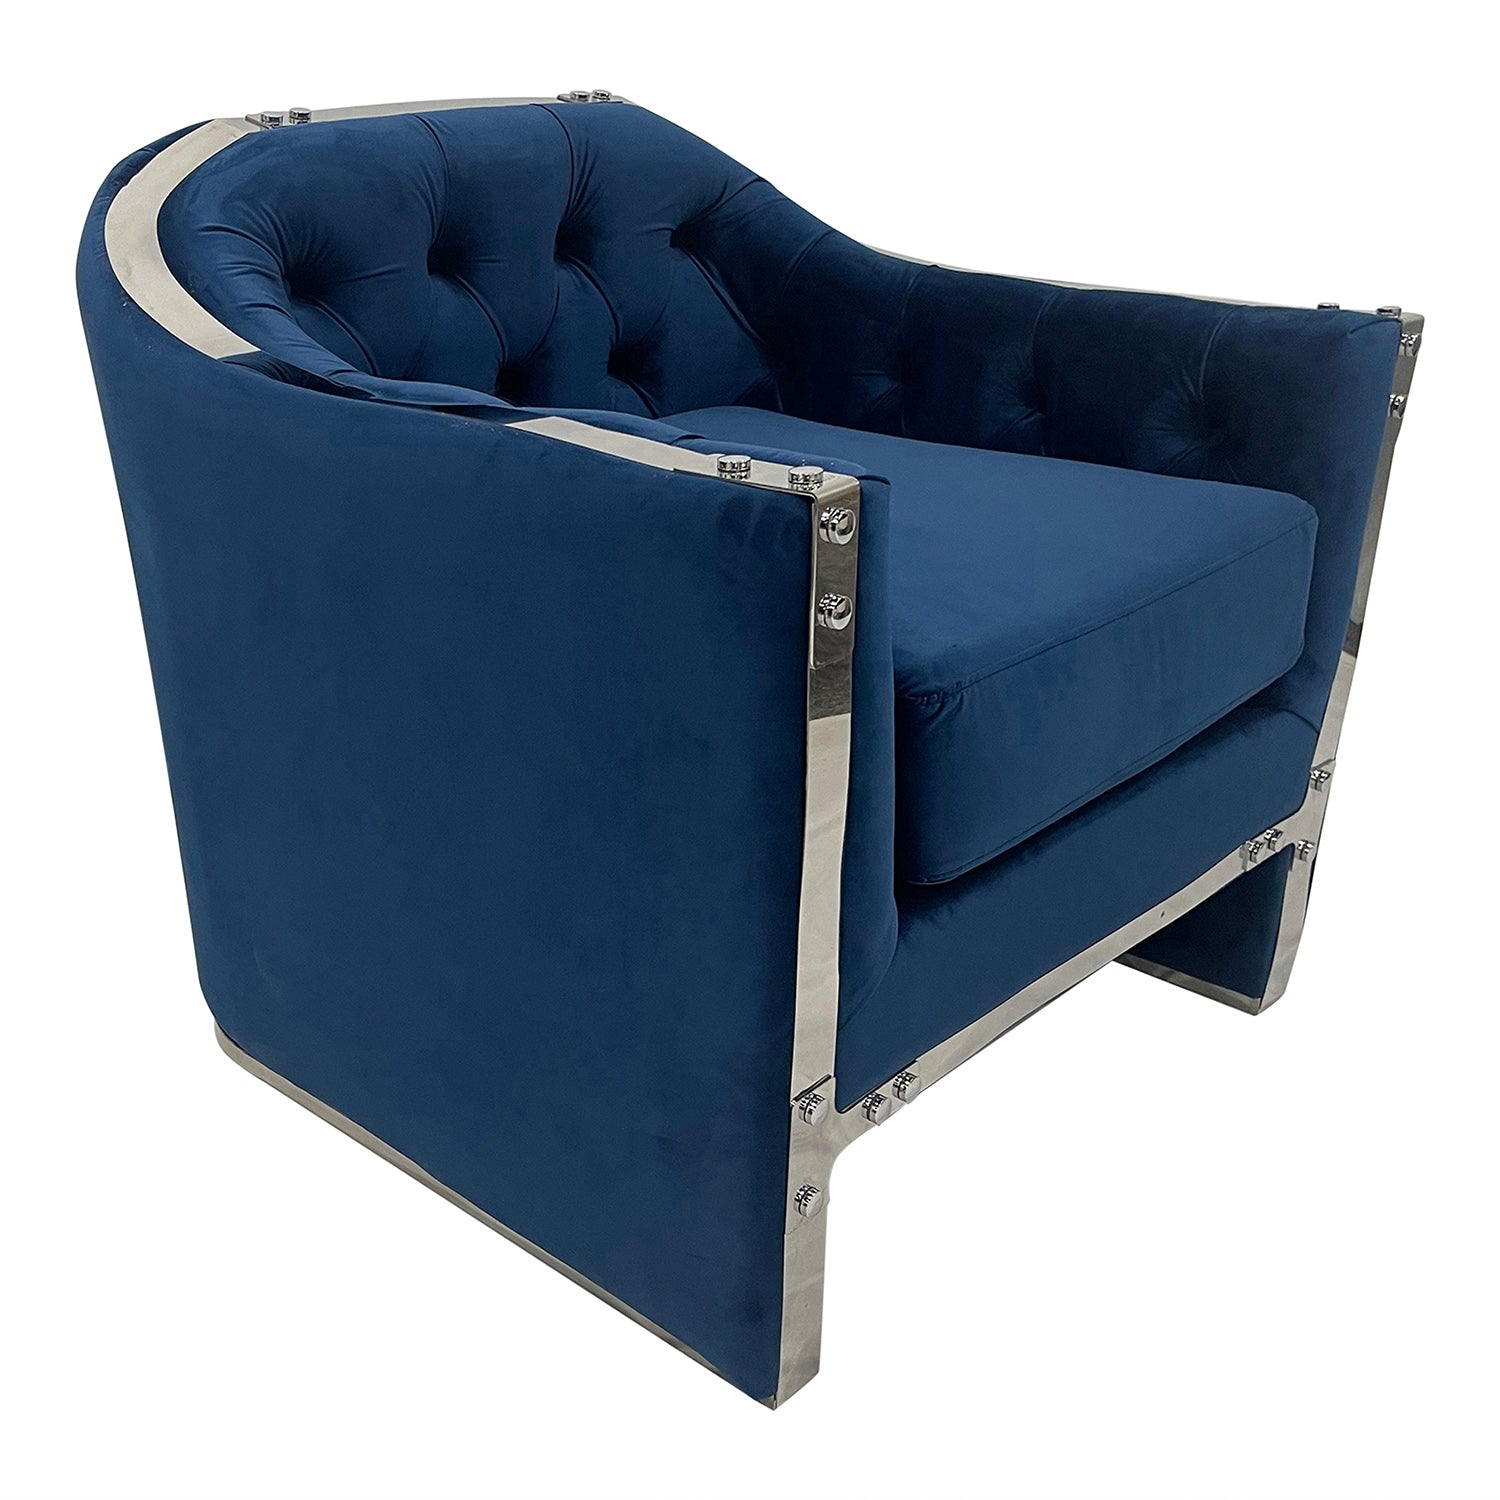 Navy and Silver Sofa Chair